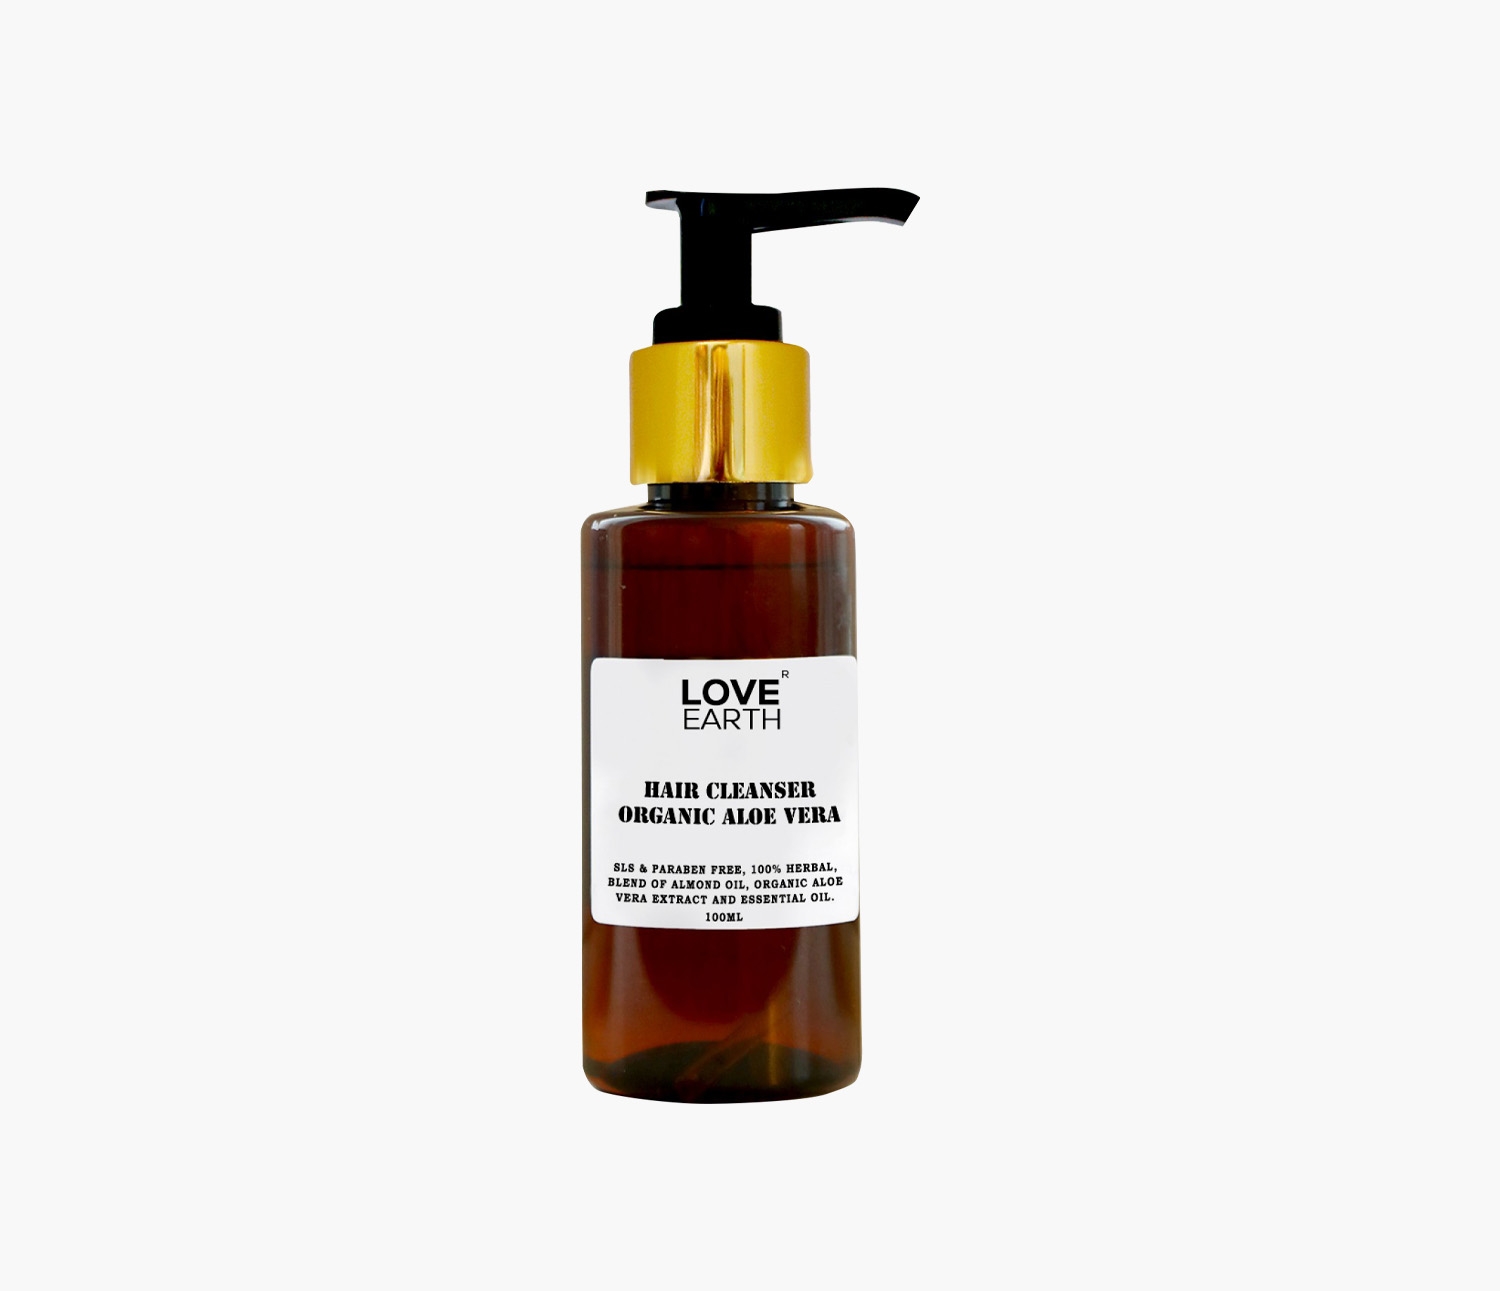 LOVE EARTH | Love Earth Hair Cleanser Organic Aloe Vera with blend of Almond oil for Hair Cleansing and Hydration 100ml